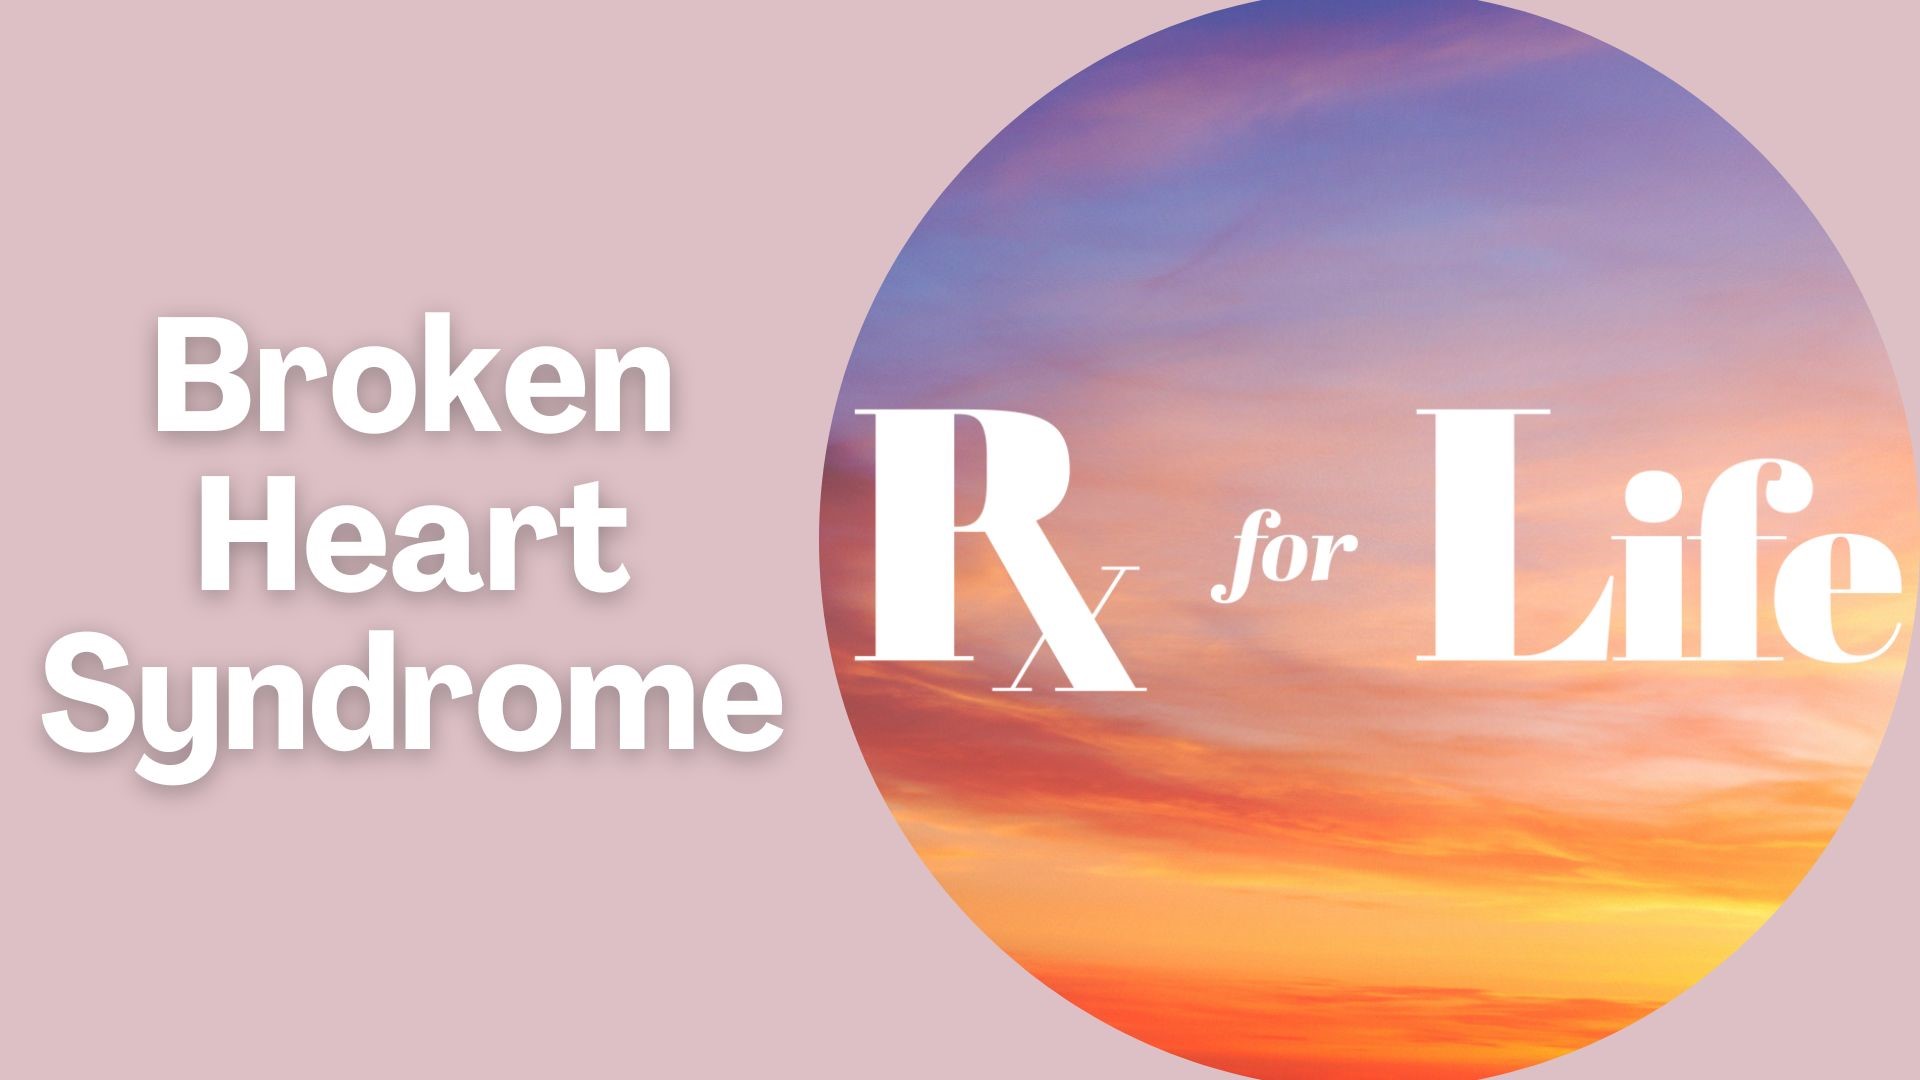 Monica Robins sits down with an expert to discuss the medical issue known as broken heart syndrome. How you can prevent it from happening and signs to watch for.